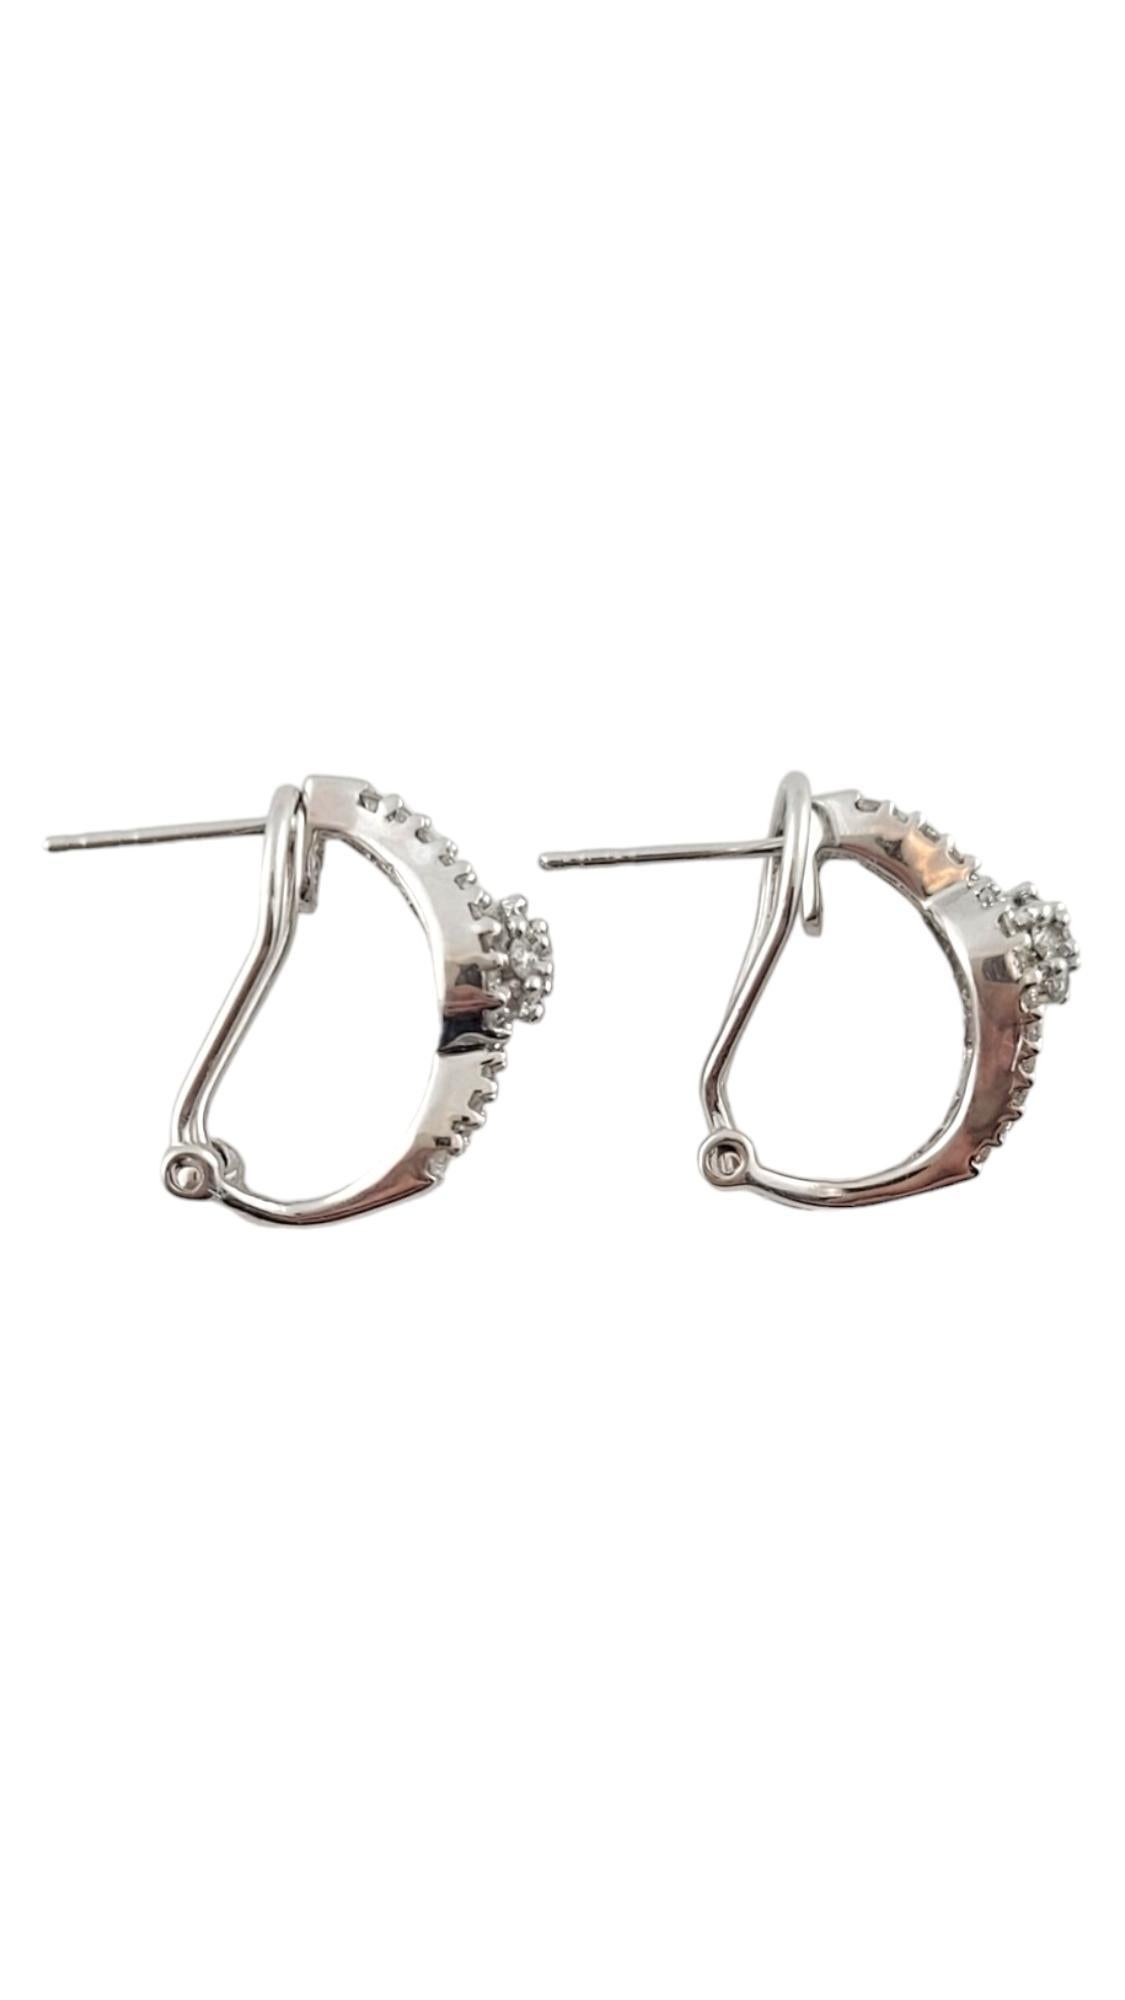 Vintage 14K White Gold Diamond Hoop Earrings

This gorgeous set of 14K white gold hoop earrings feature 24 beautiful baguette cut diamonds and 70 sparkling round brilliant cut diamonds!

Approximate total diamond weight: .64 cts

Diamond color: